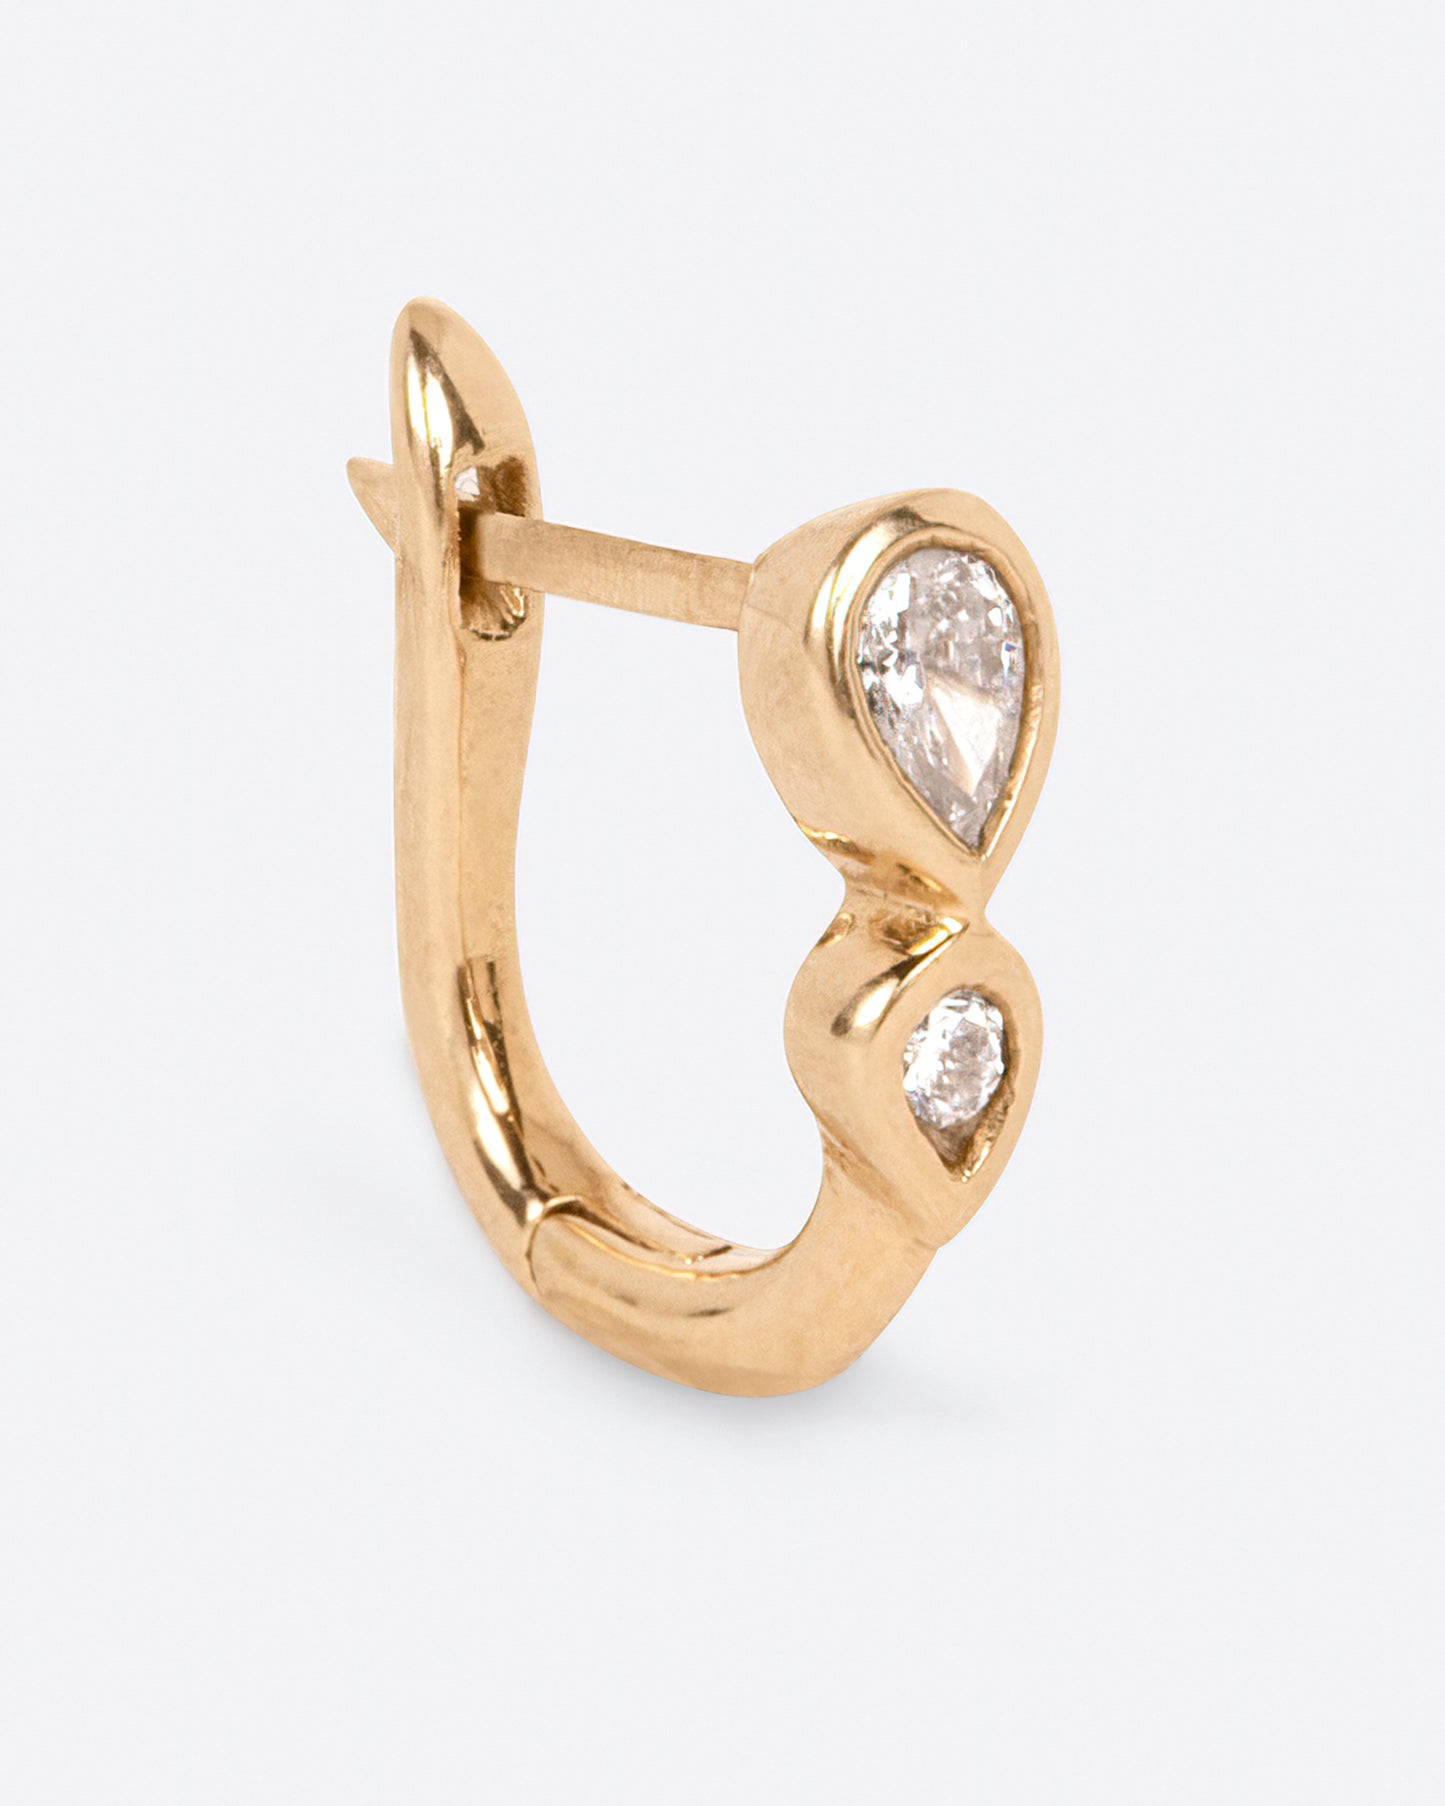 A huggie hoop earring with a pair of stacked pear shaped diamonds.